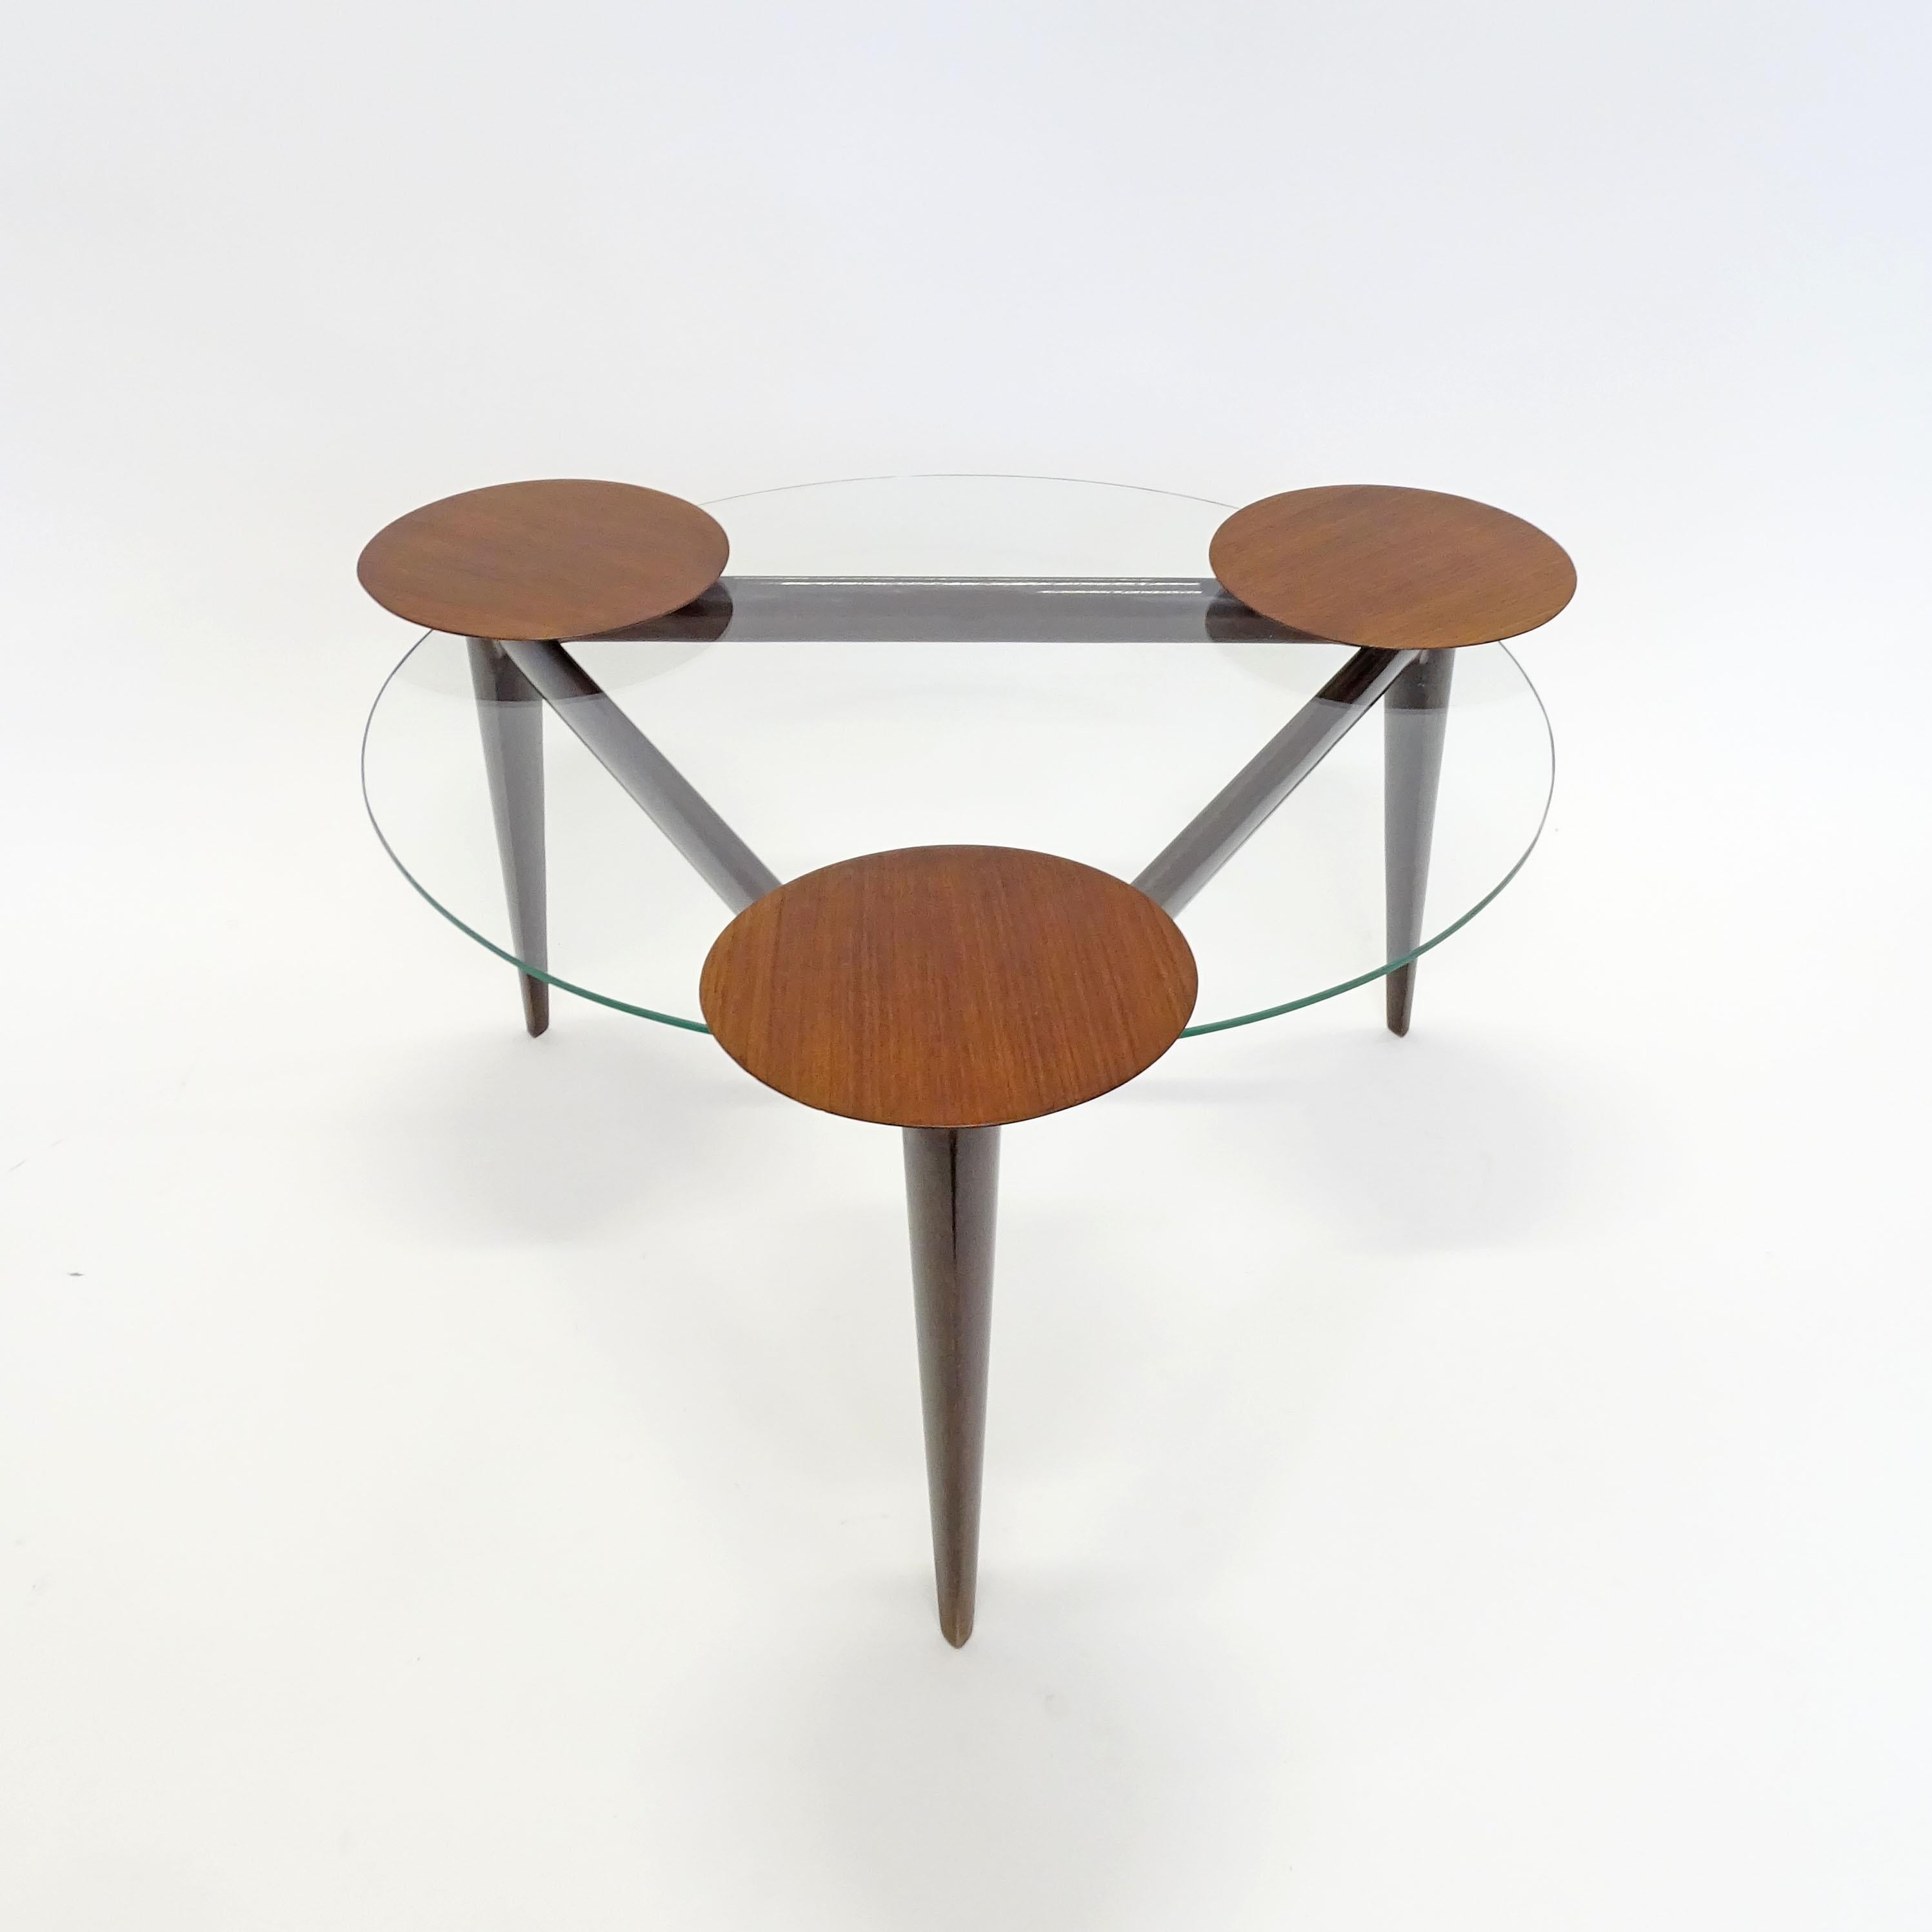 Splendid Italian 1950s coffee table with rotating wooden trays.
Glass top height 38cm
Wood trays height 41cm
Glass top diameter 71cm
Diameter with open trays 100cm
A real talking point piece.